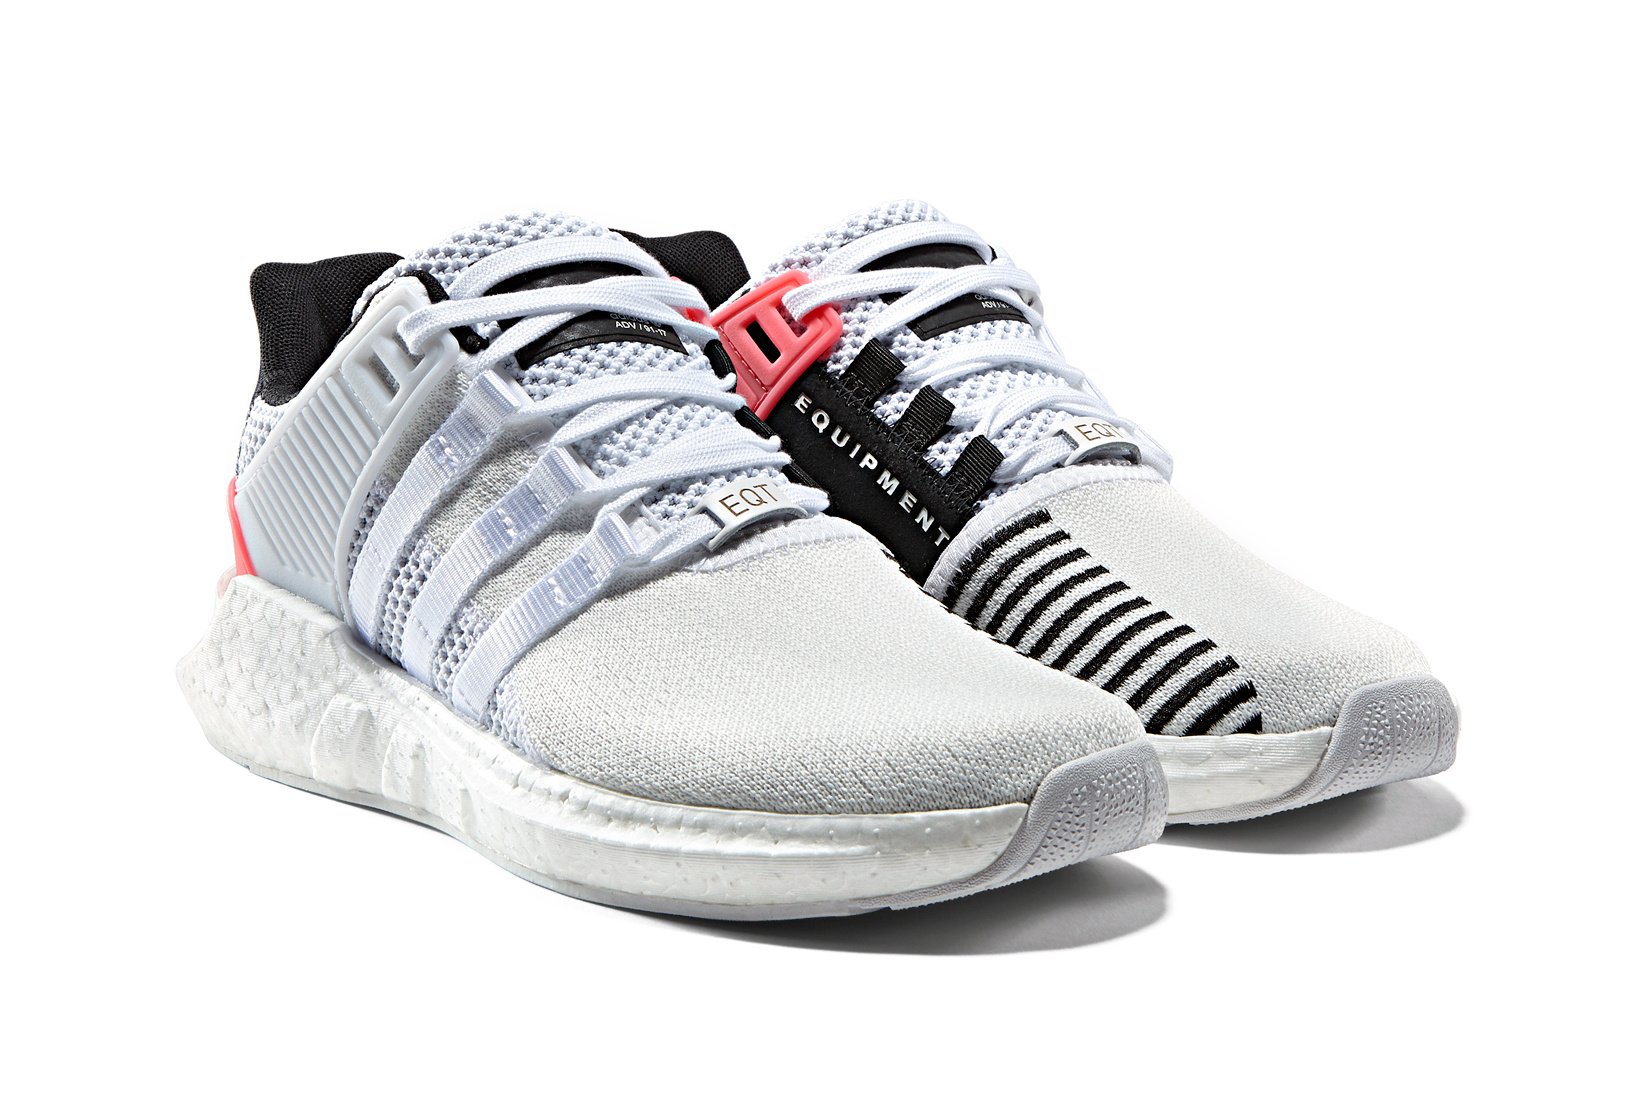 adidas EQT Support 93/17 White/Turbo Red